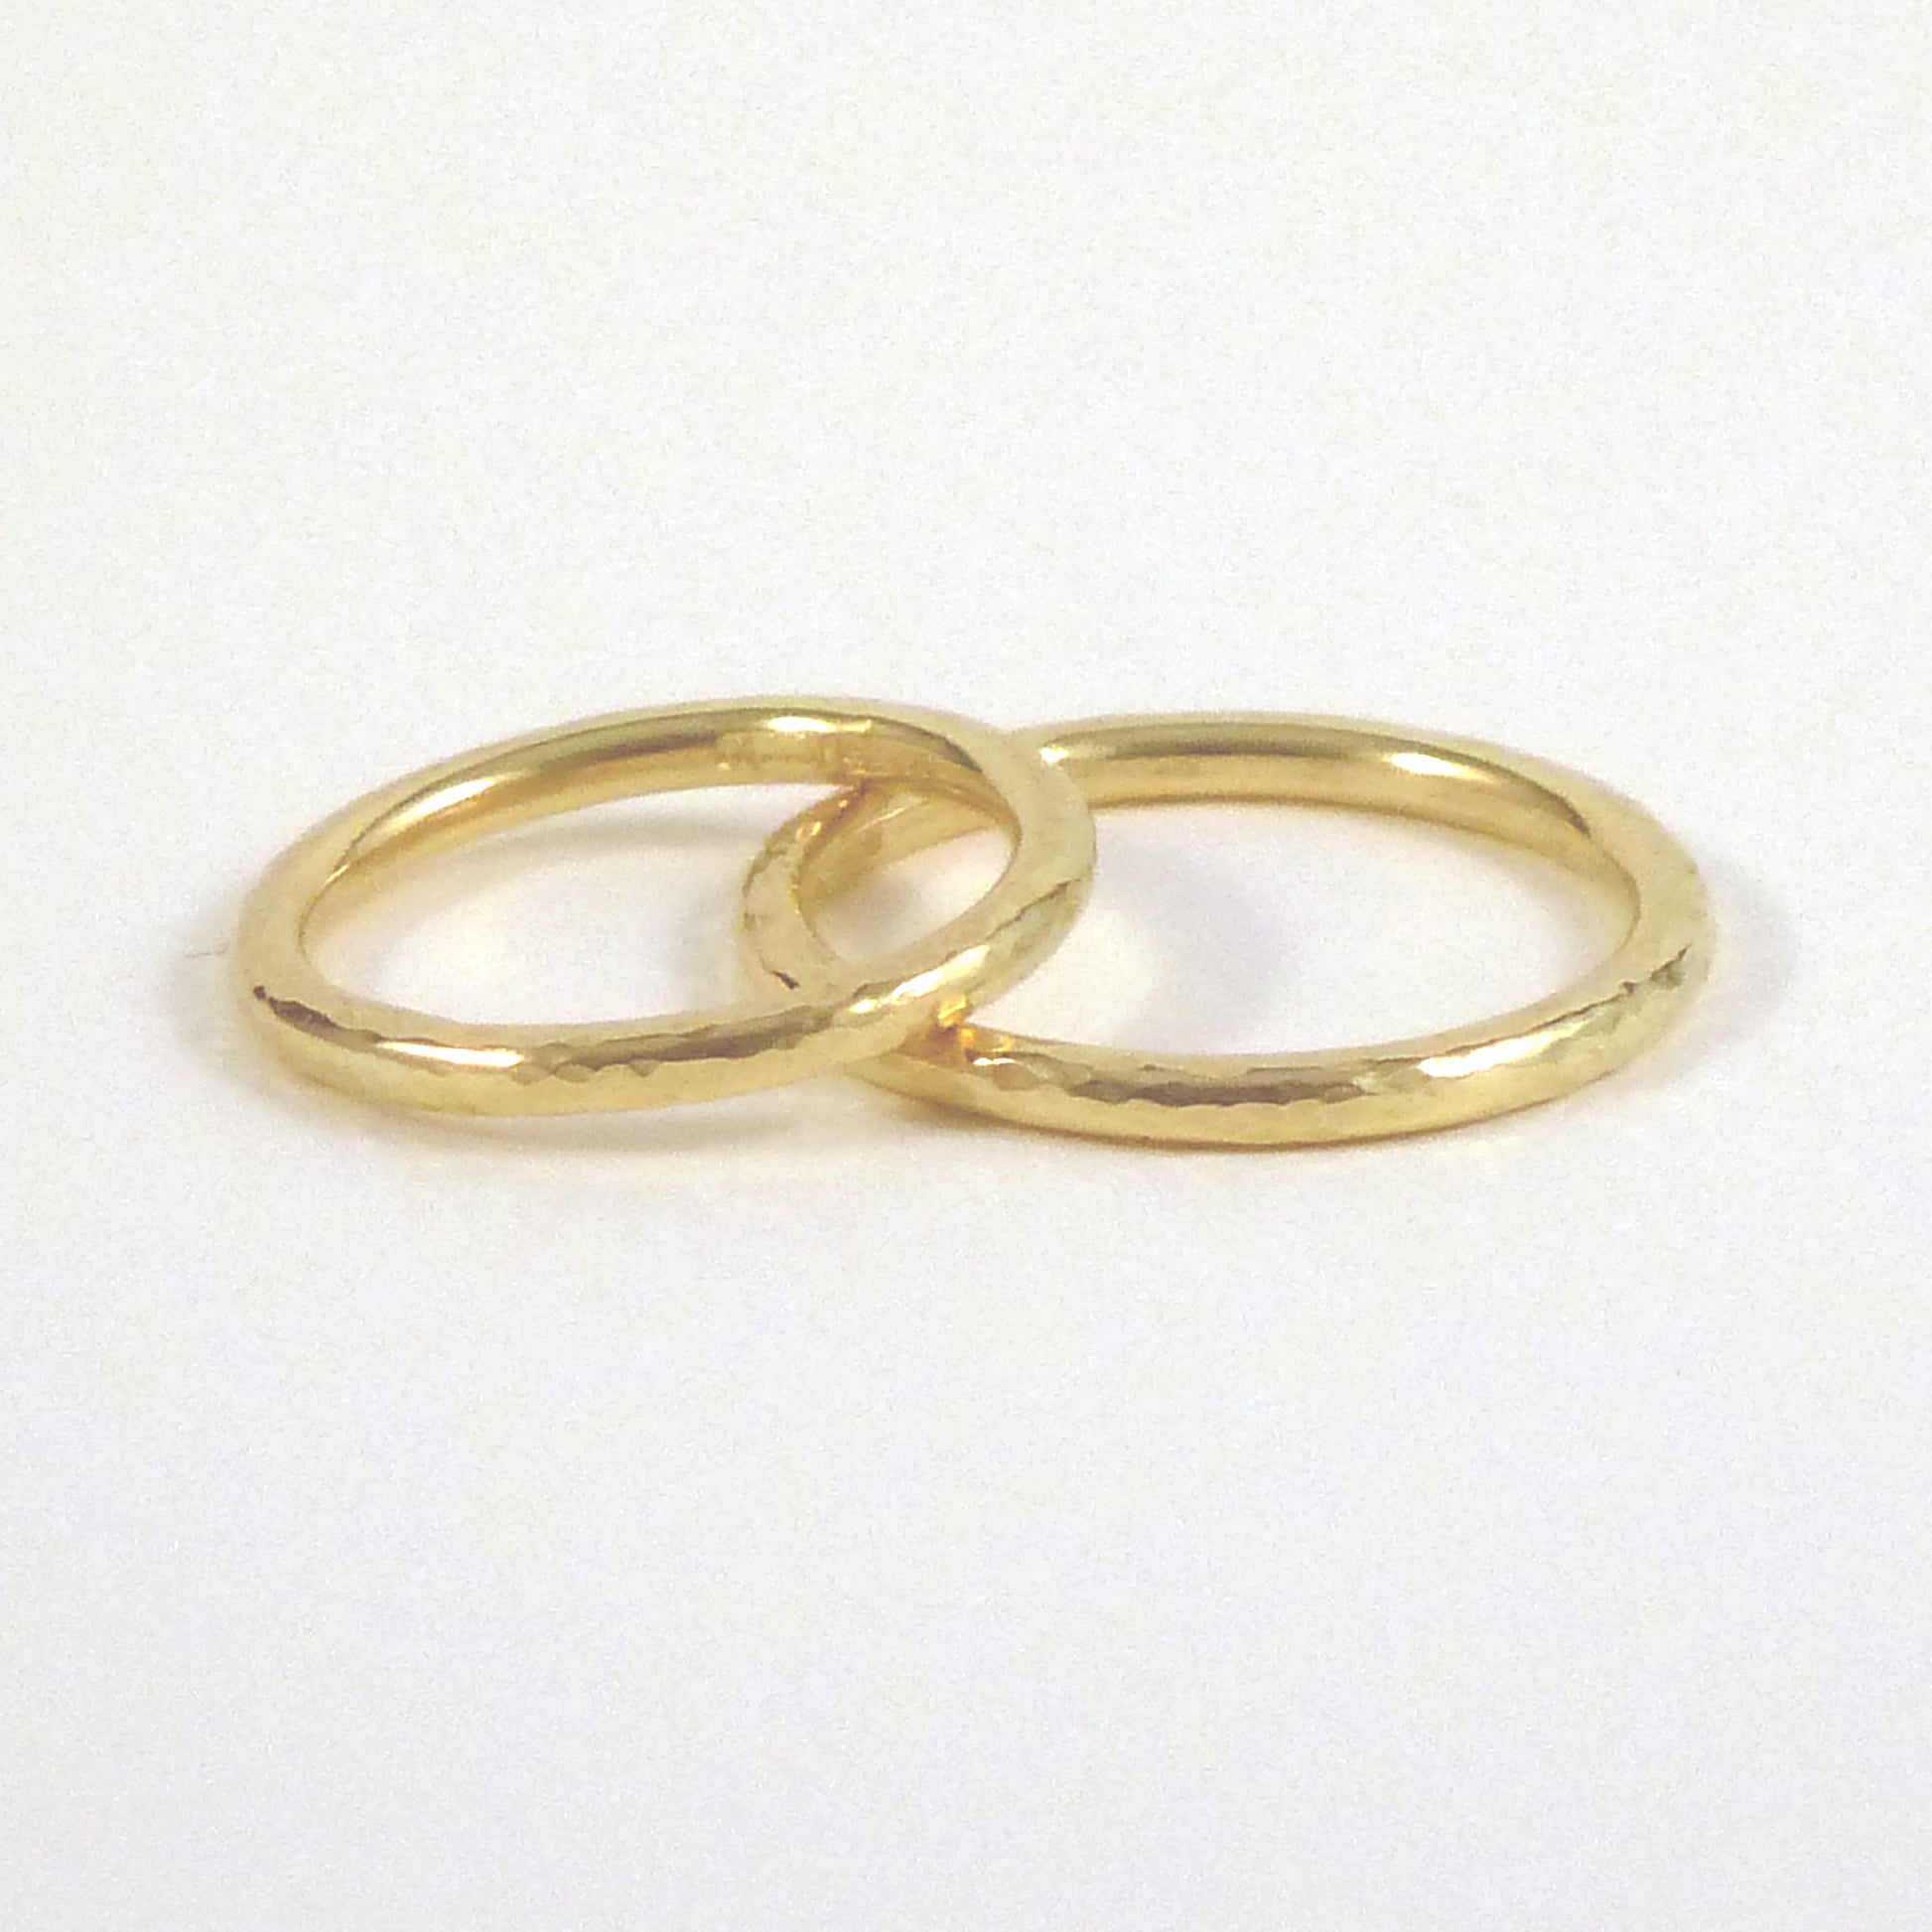 2mm halo bands in 18ct yellow gold, hammered finish, image on white background